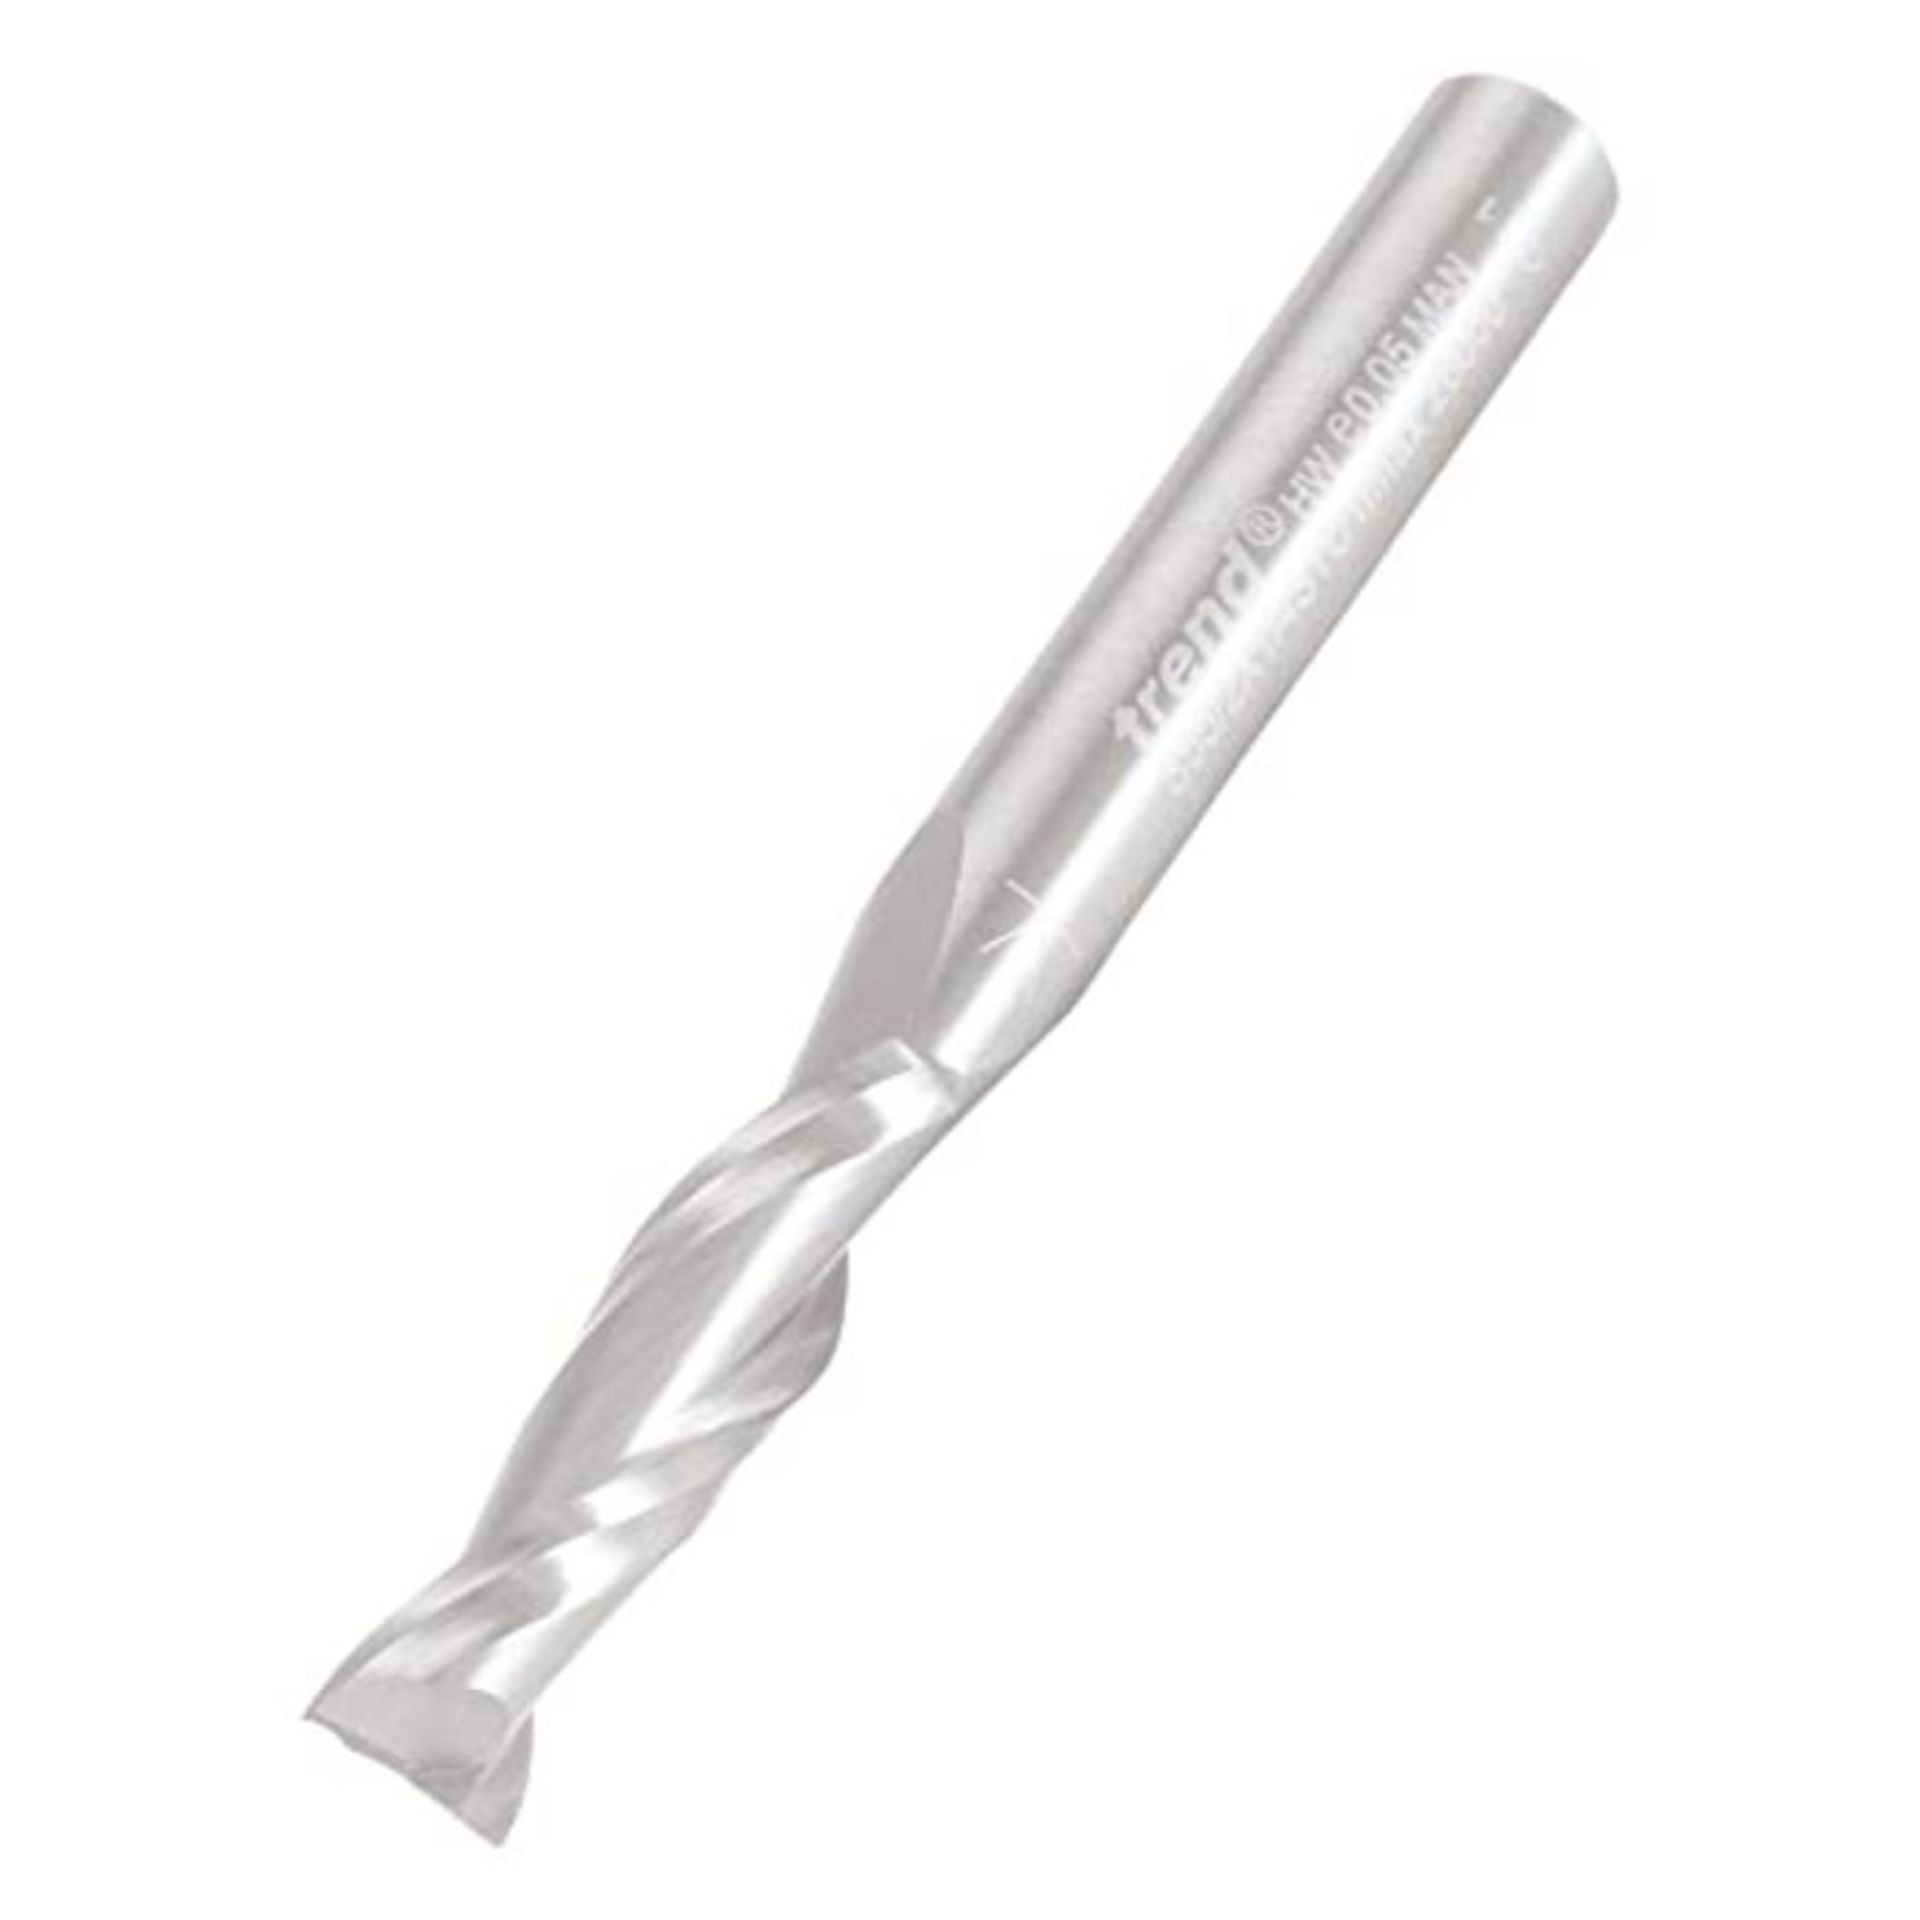 Trend S55/2X1/4STC Professional 1/4" Shank Right Hand Spiral-S55/2X1/4STC-Diameter 6.3